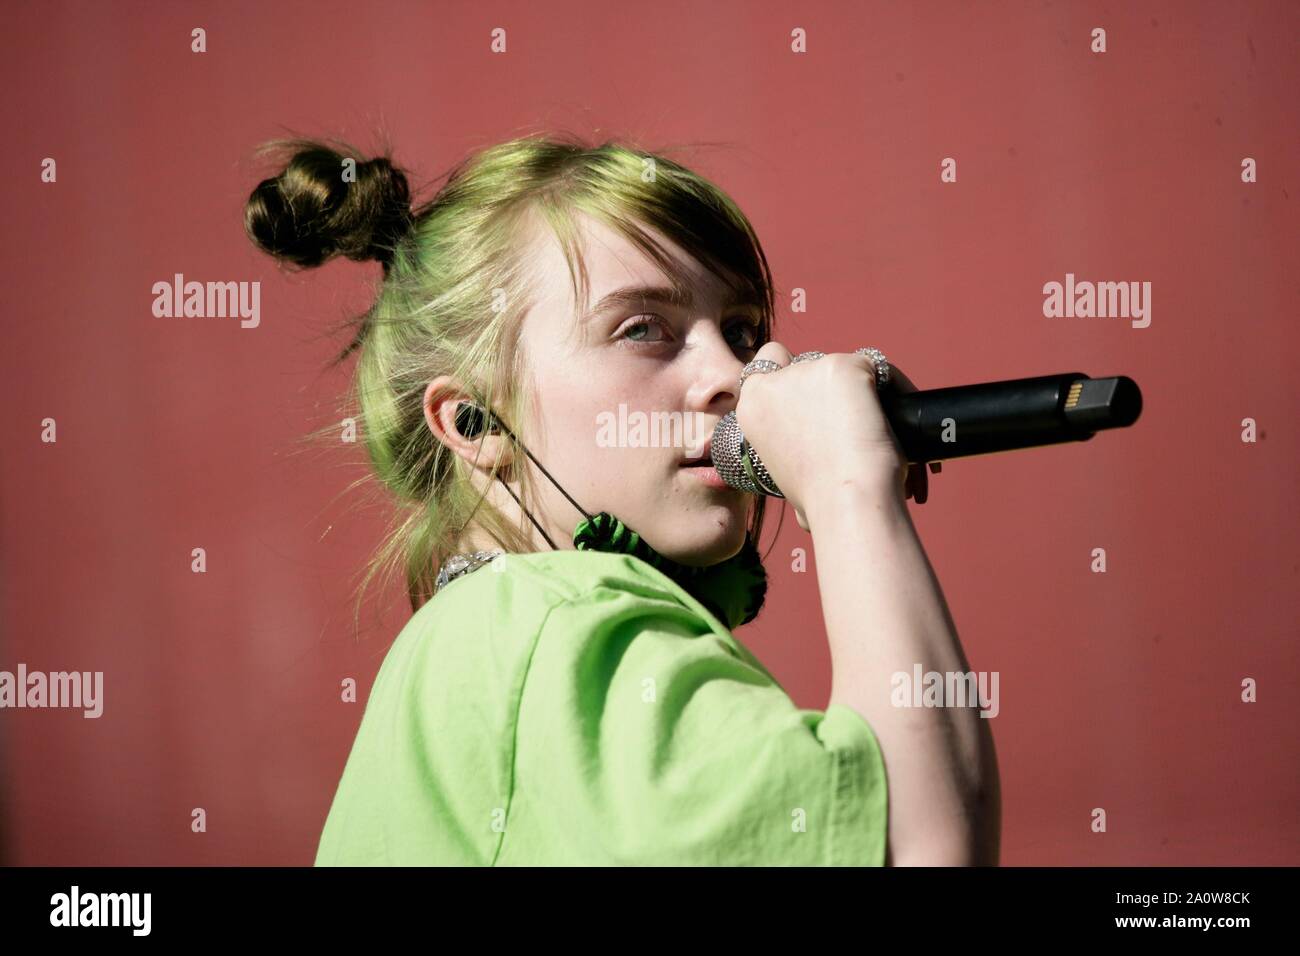 Las Vegas, NV, USA. 21st Sep, 2019. Billie Eilish on stage for 2019 iHeartRadio Music Festival Daytime Stages, Las Vegas Festival Grounds, Las Vegas, NV September 21, 2019. Credit: JA/Everett Collection/Alamy Live News Stock Photo